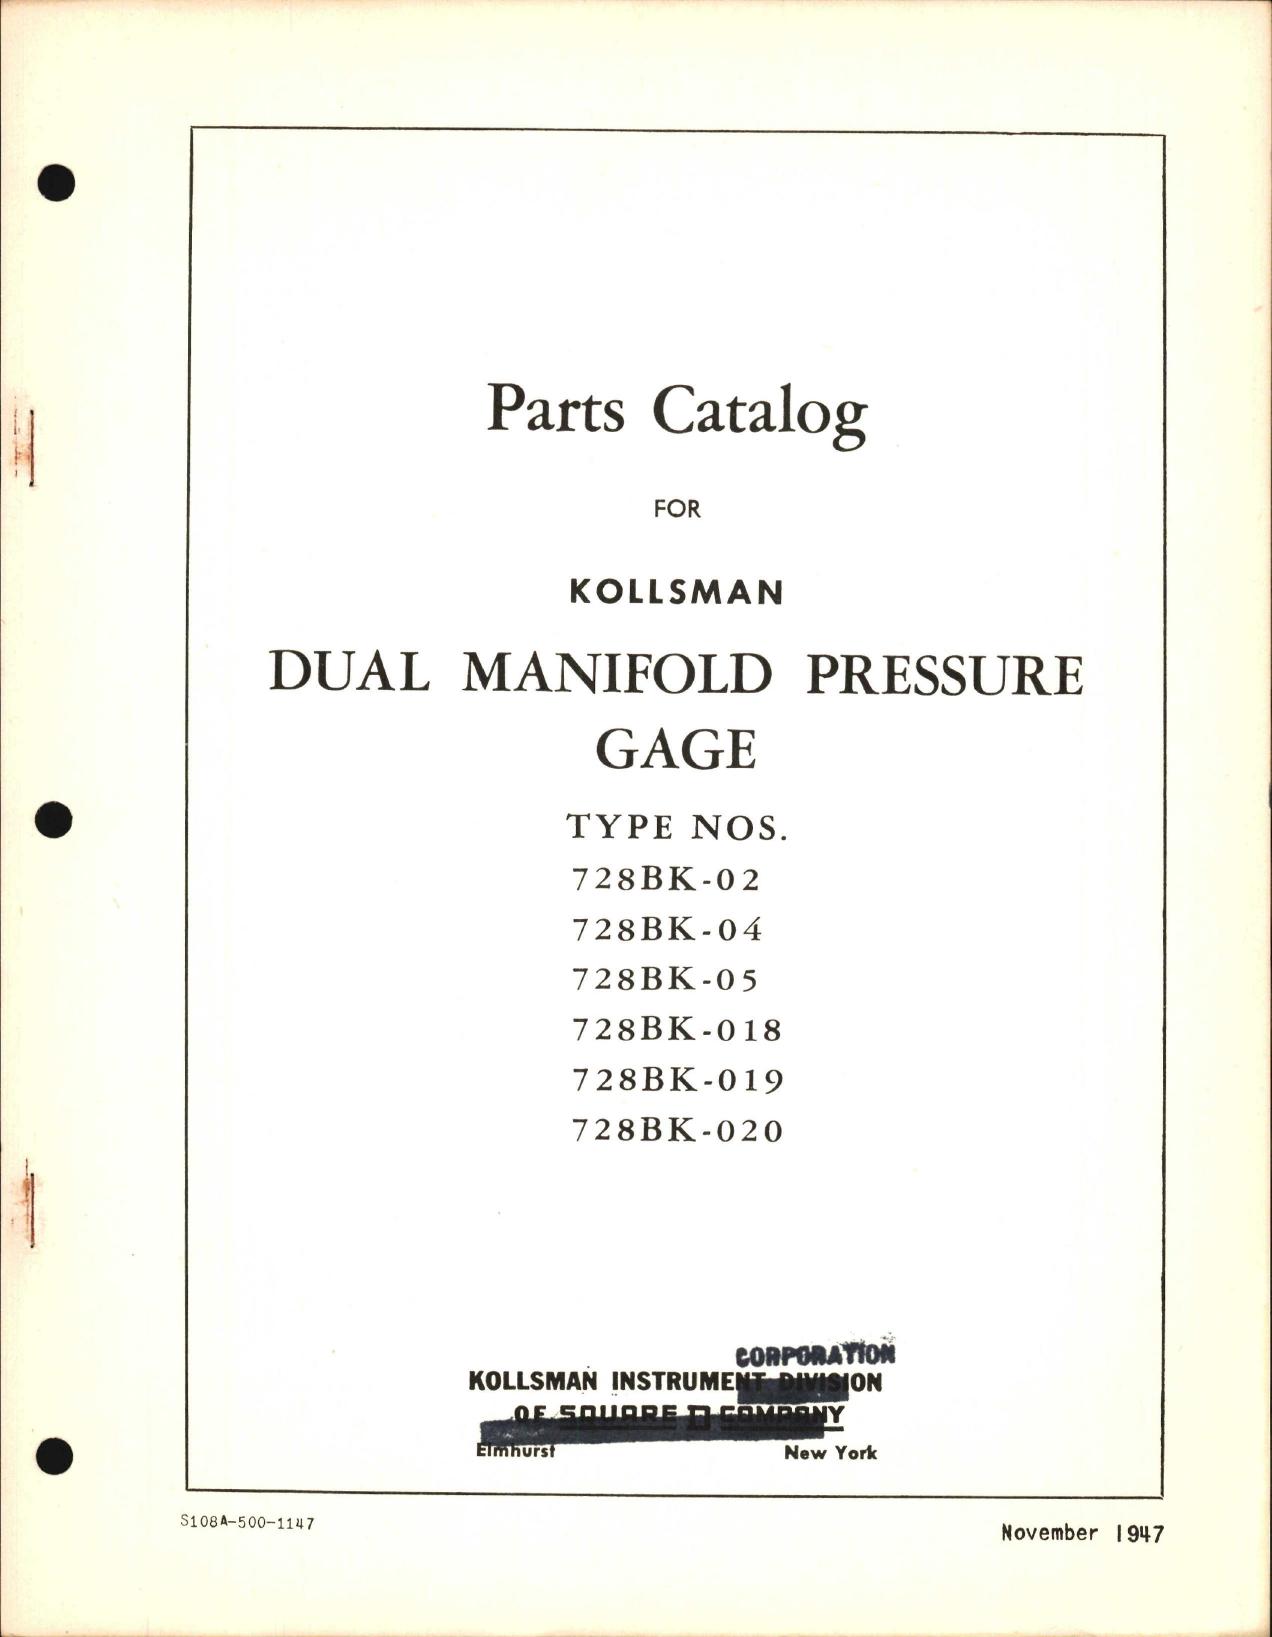 Sample page 1 from AirCorps Library document: Parts Catalog for Kollsman Dual Manifold Pressure Gage